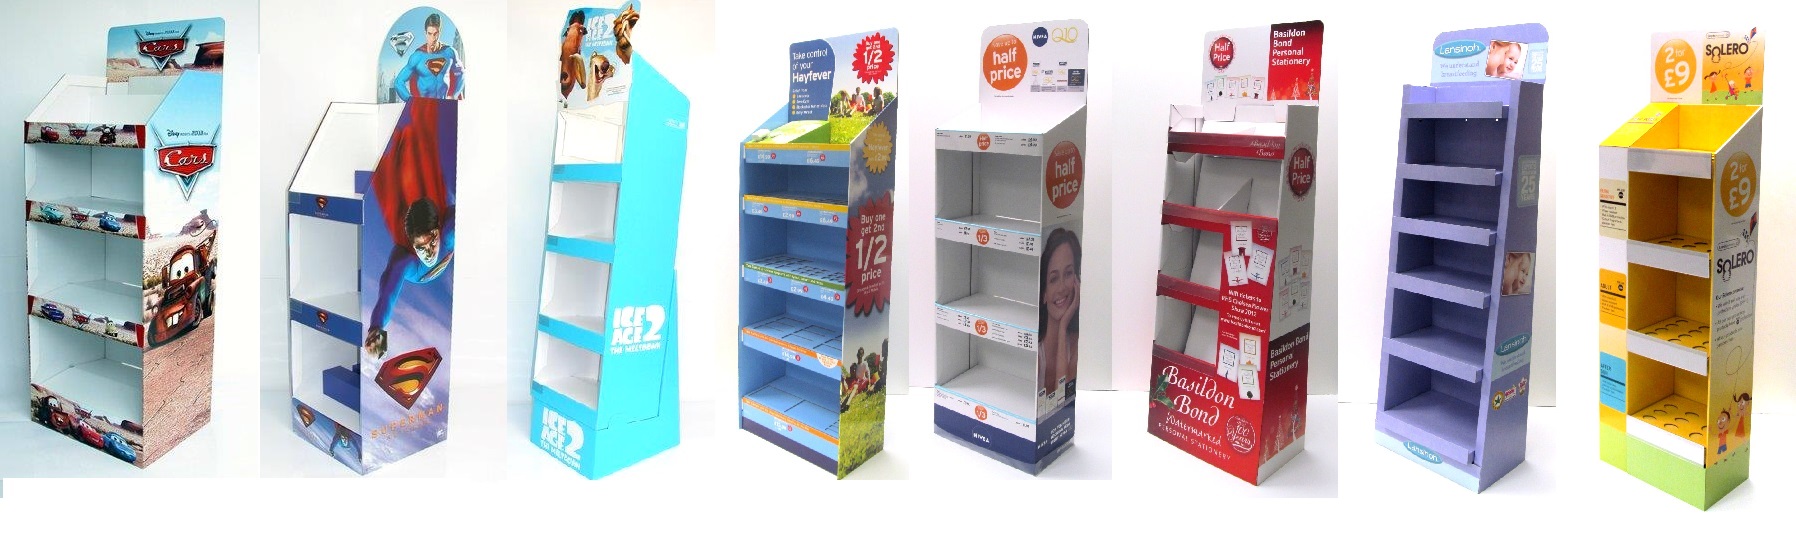 Kenton’s Cost Effective Point of Sale Display Solutions ...